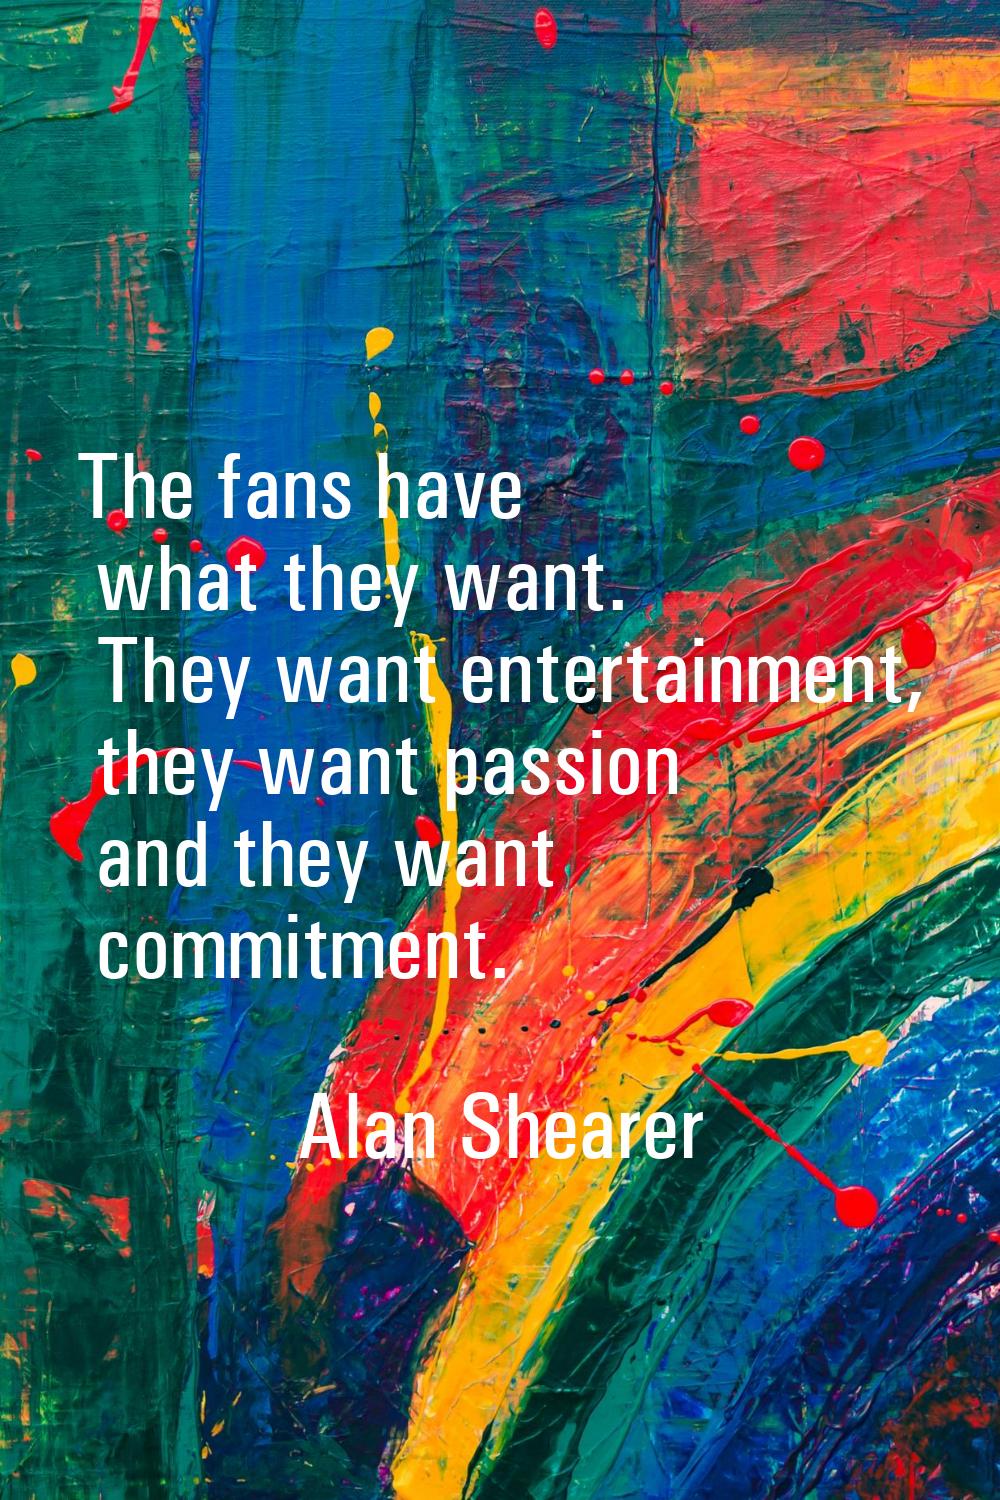 The fans have what they want. They want entertainment, they want passion and they want commitment.